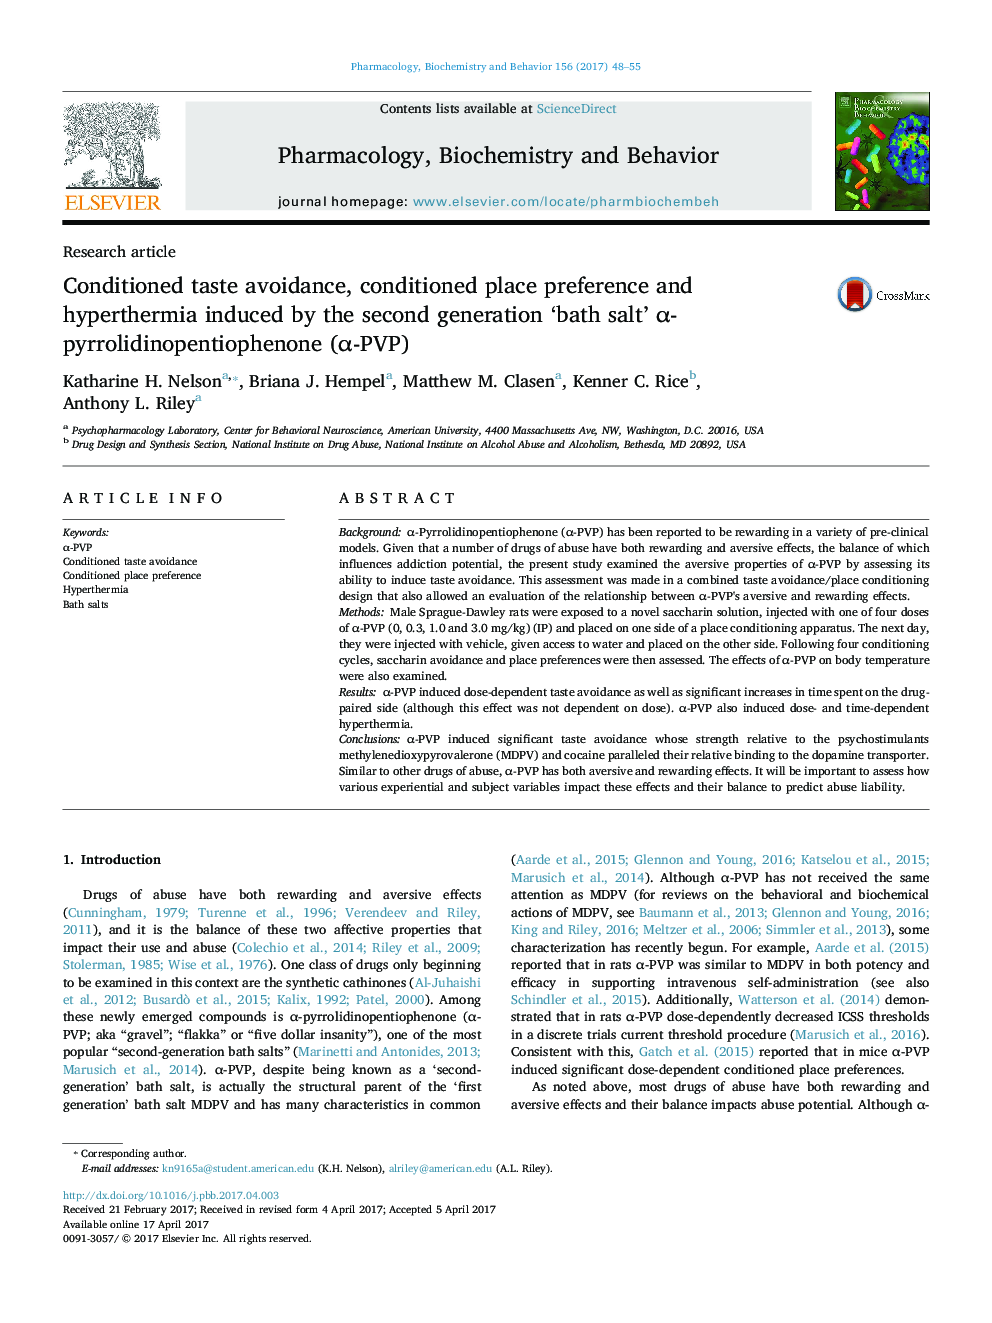 Research articleConditioned taste avoidance, conditioned place preference and hyperthermia induced by the second generation 'bath salt' Î±-pyrrolidinopentiophenone (Î±-PVP)